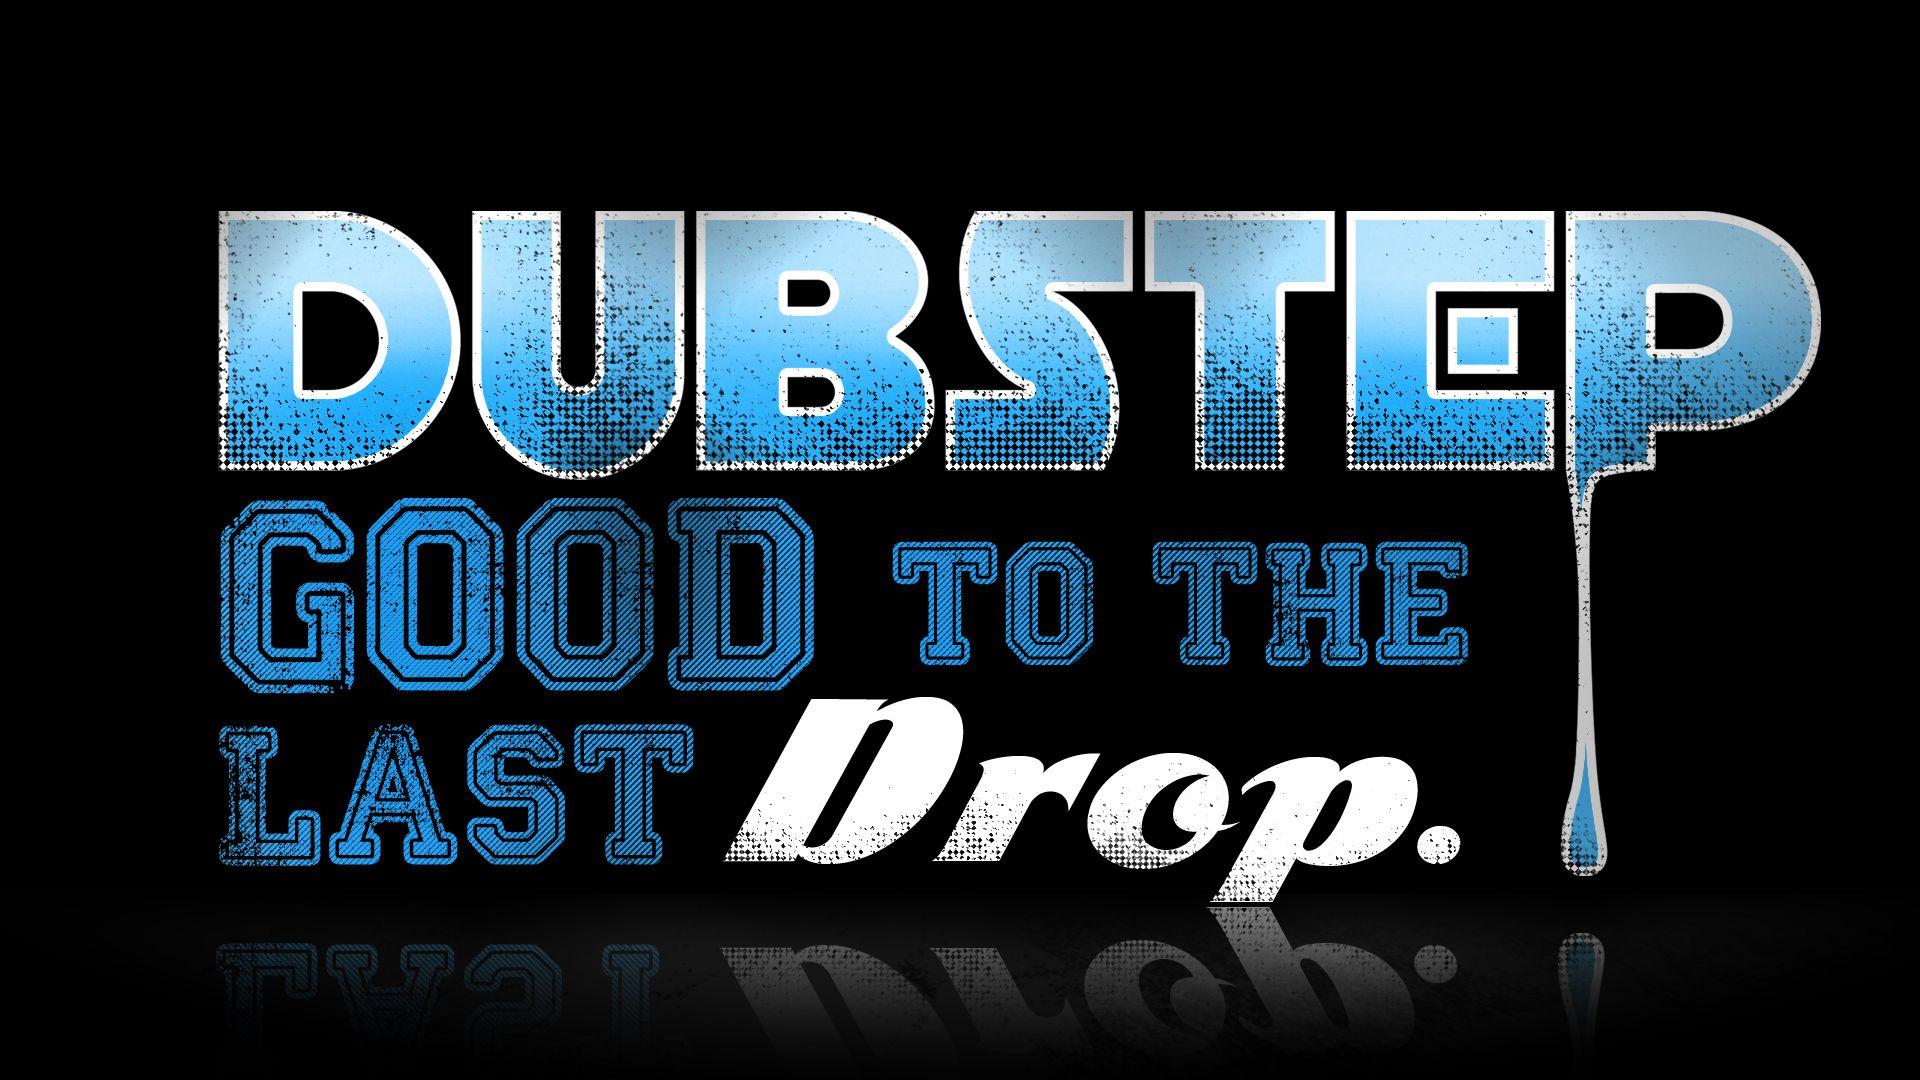 Dubstep Full HD Wallpaper and Background Imagex1080